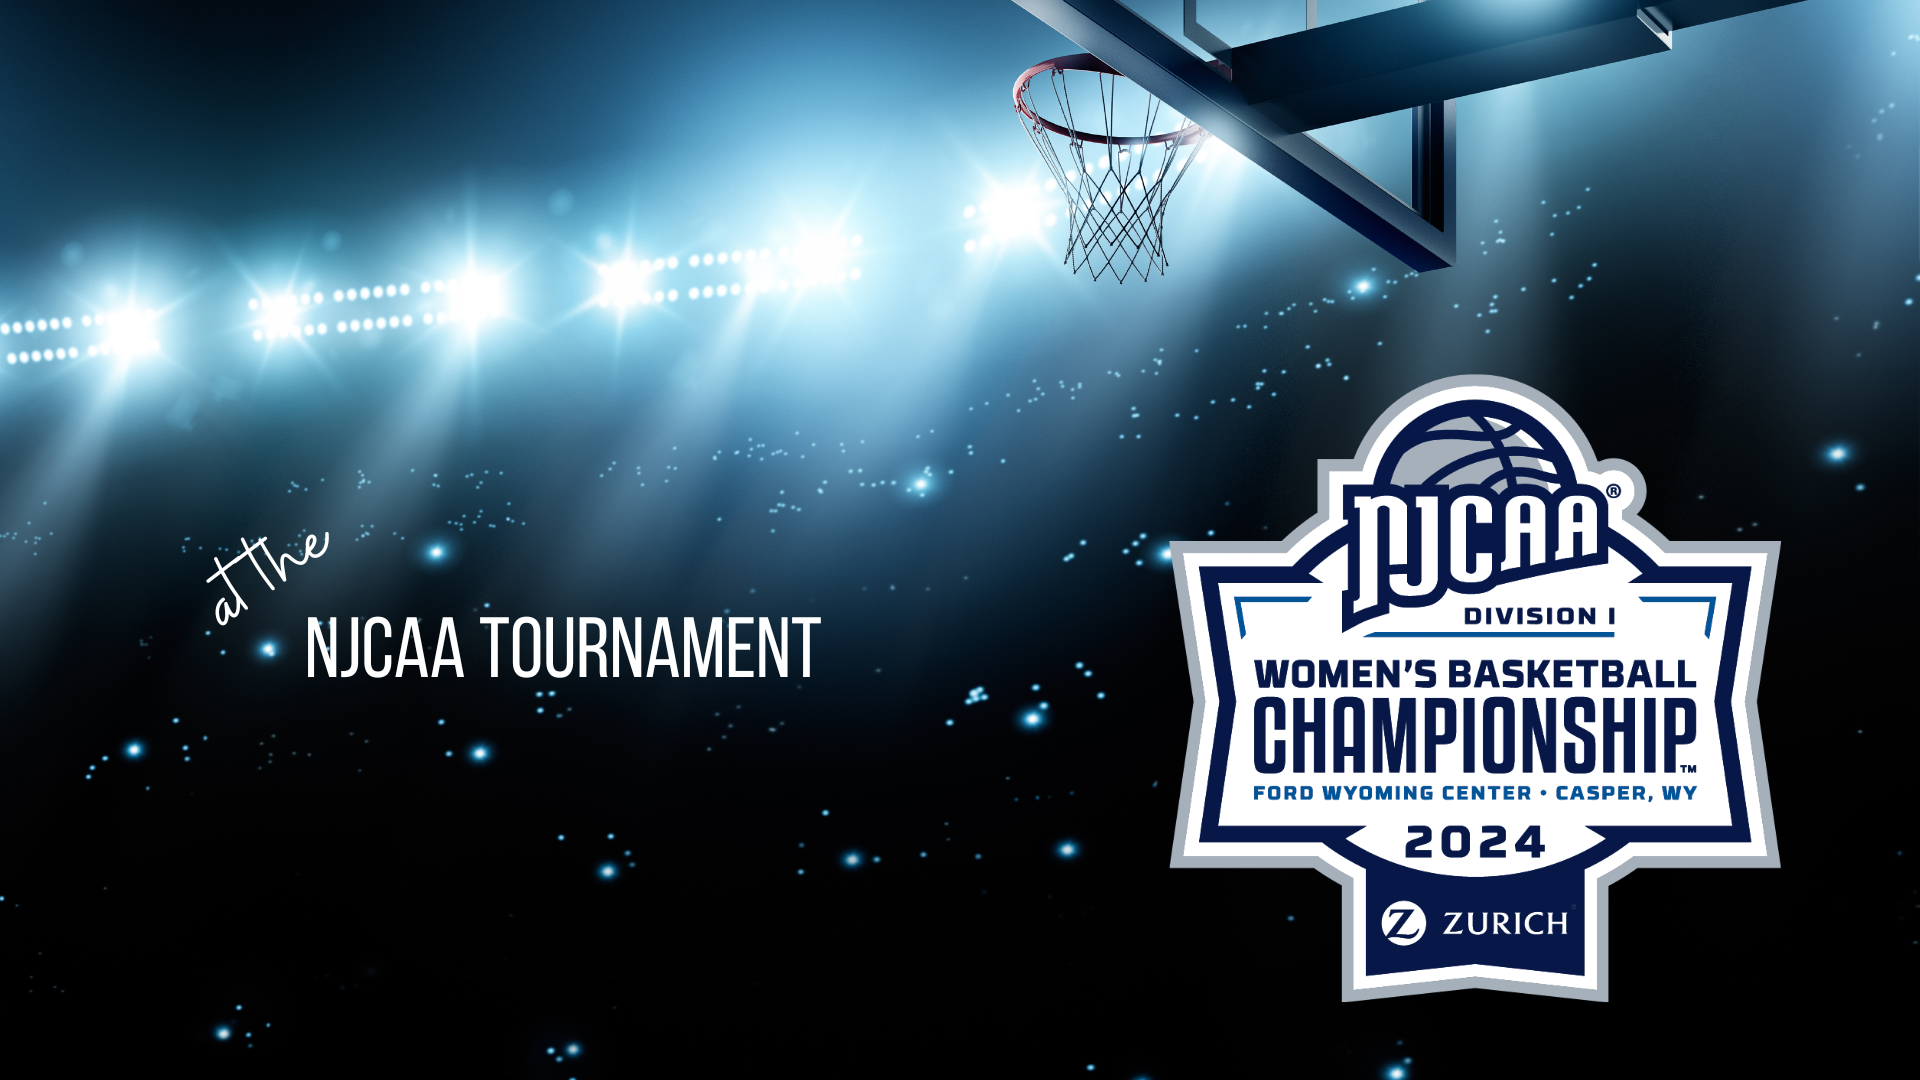 AT THE NJCAA TOURNAMENT:  Wednesday